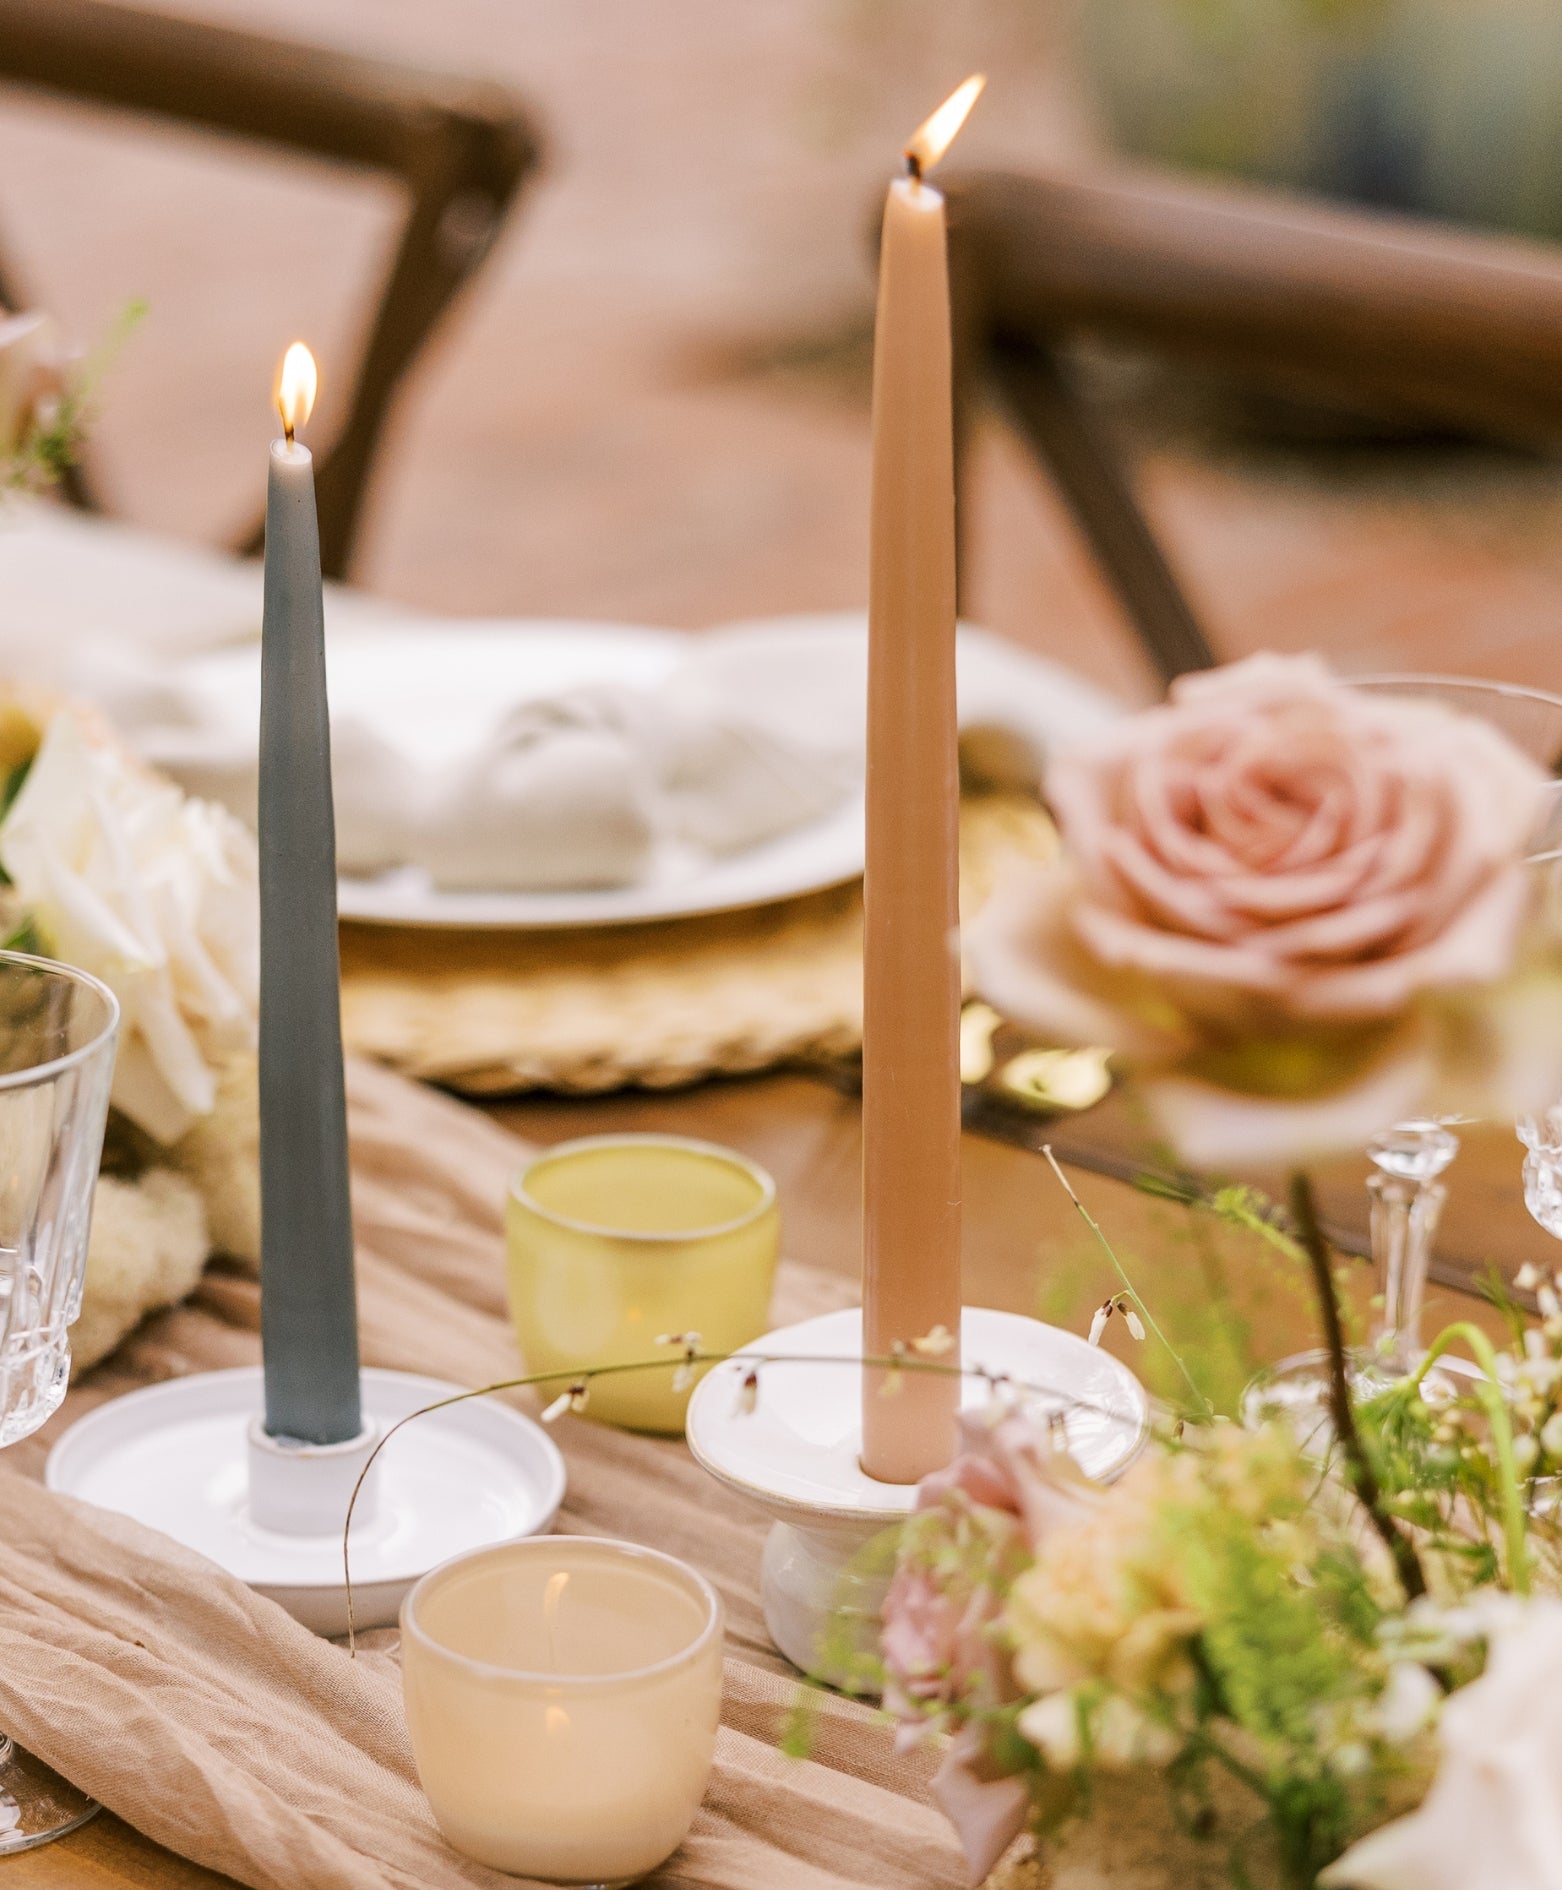 What a Host Home: Taper Dinner Scented Candles